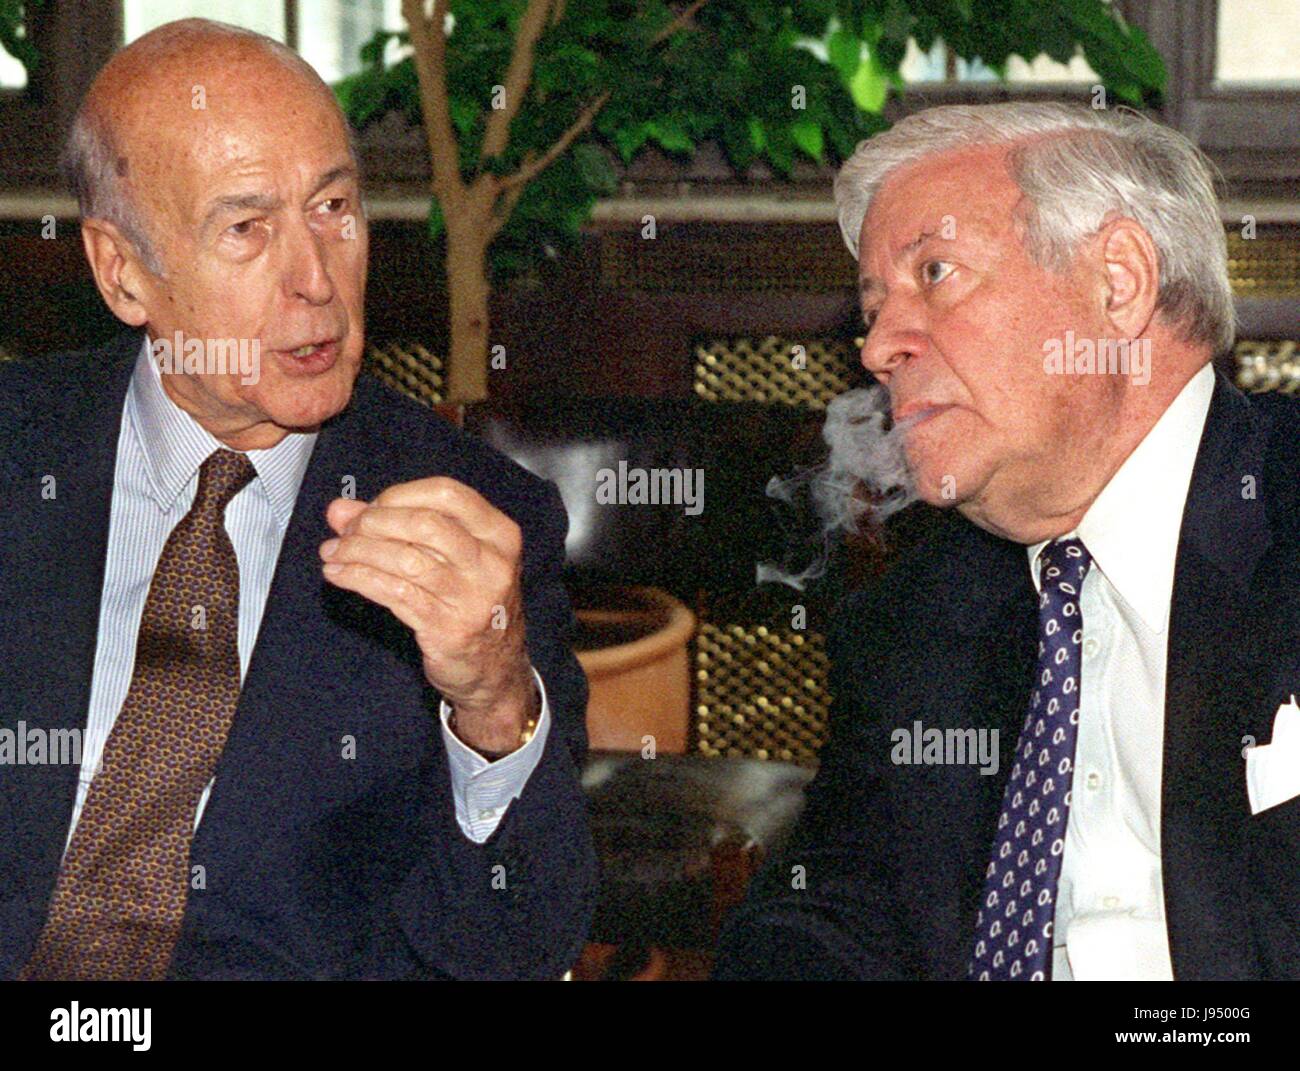 Former German Chancellor Helmut Schmidt (r) and former French President Valery Giscard d'Estaing (l) on 13 July 1998 in Bremen 20 years after they started the initiative for the European Monetary System. | usage worldwide Stock Photo